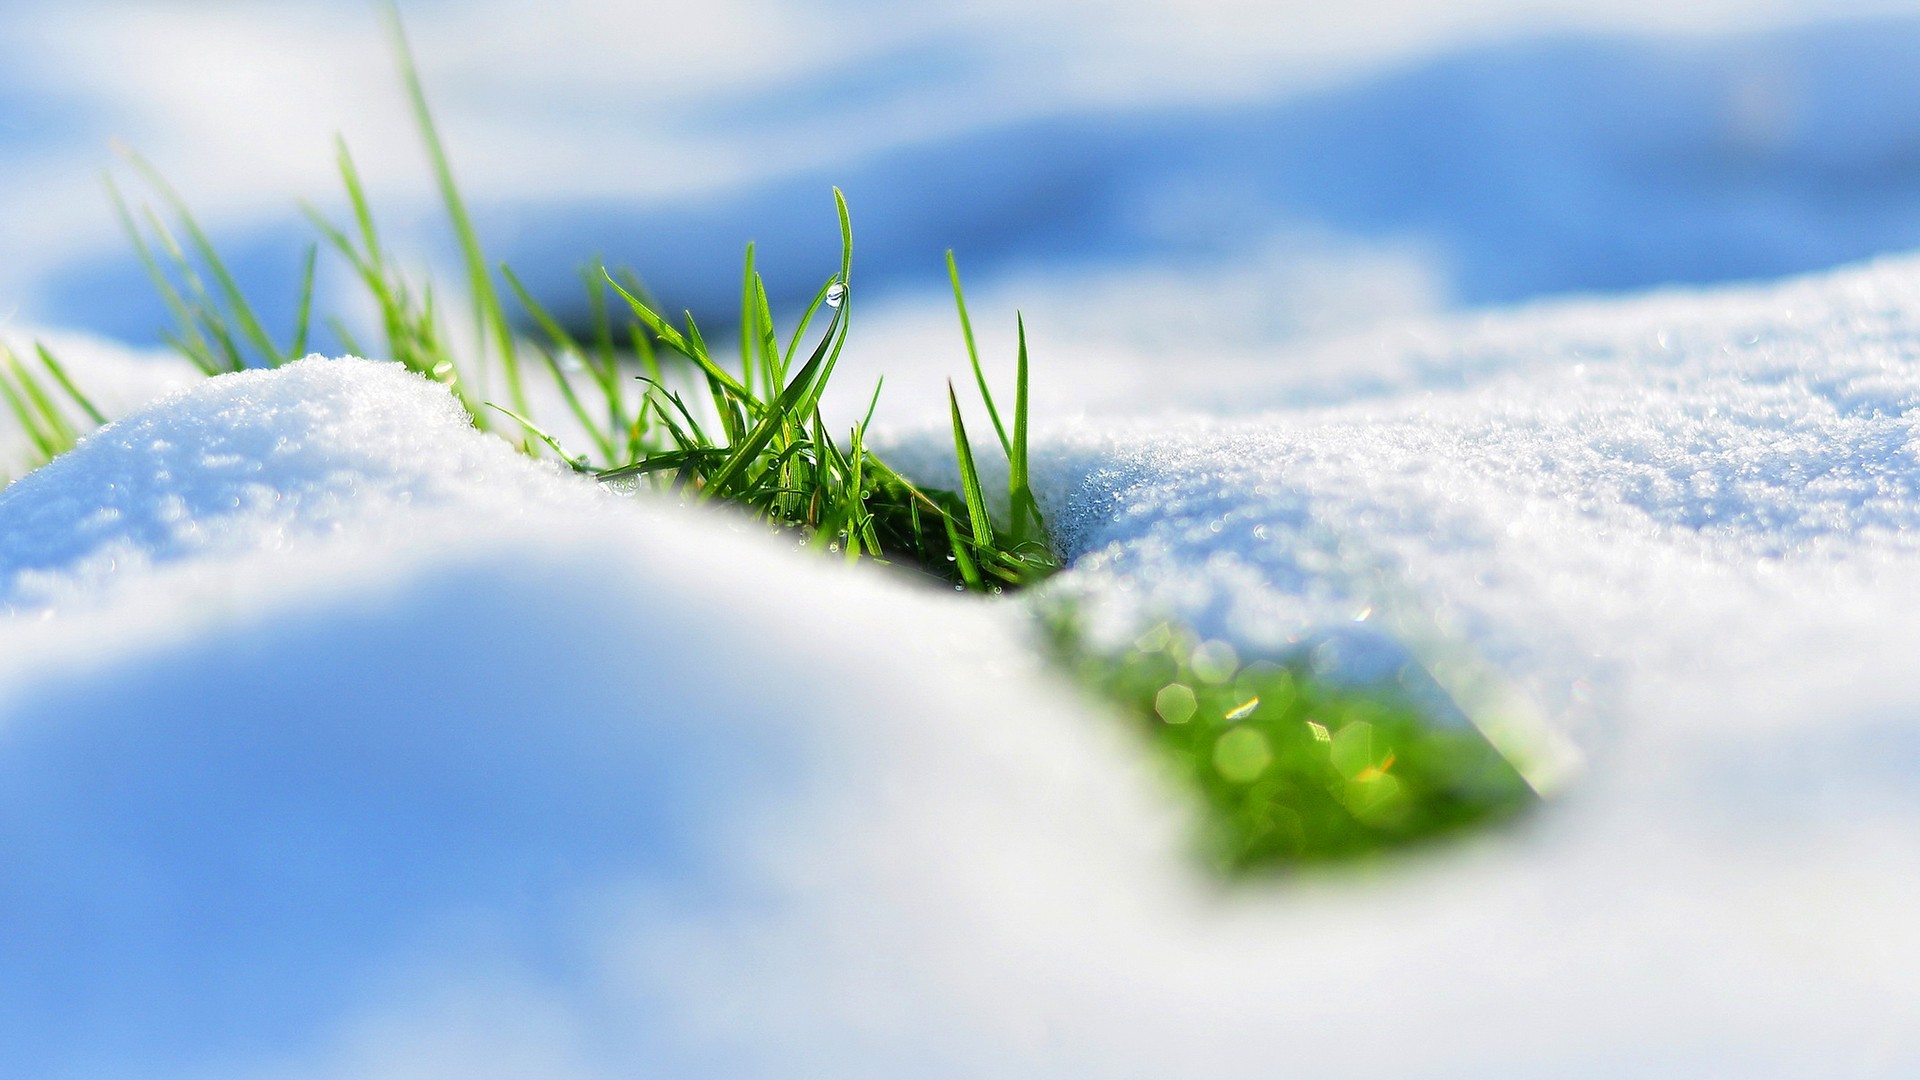 Nature___Seasons___Spring_Grass_makes_its_way_from_under_the_white_snow_099393_.jpg